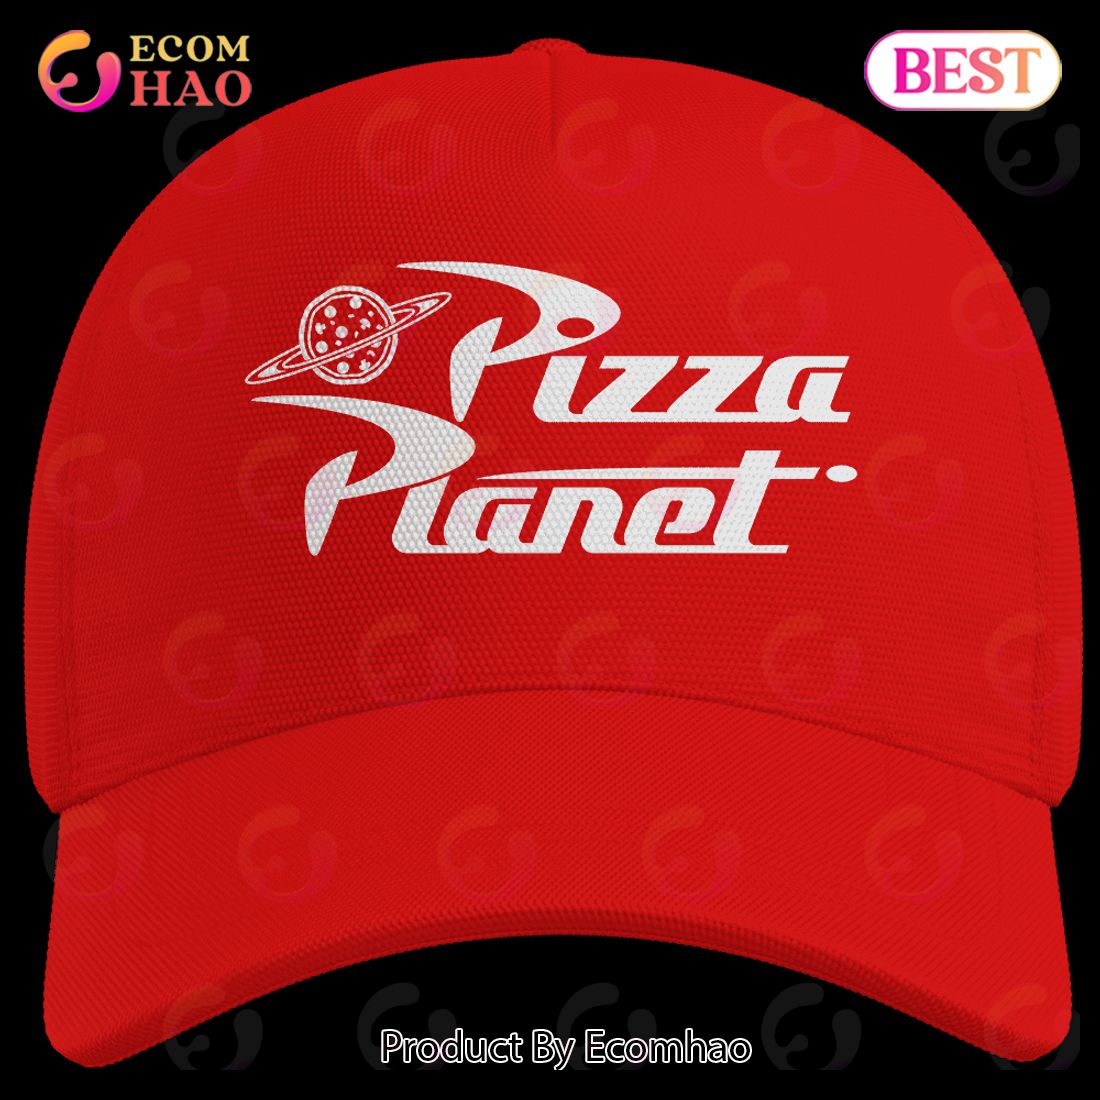 Toy Story Pizza Planet Delivery Cap